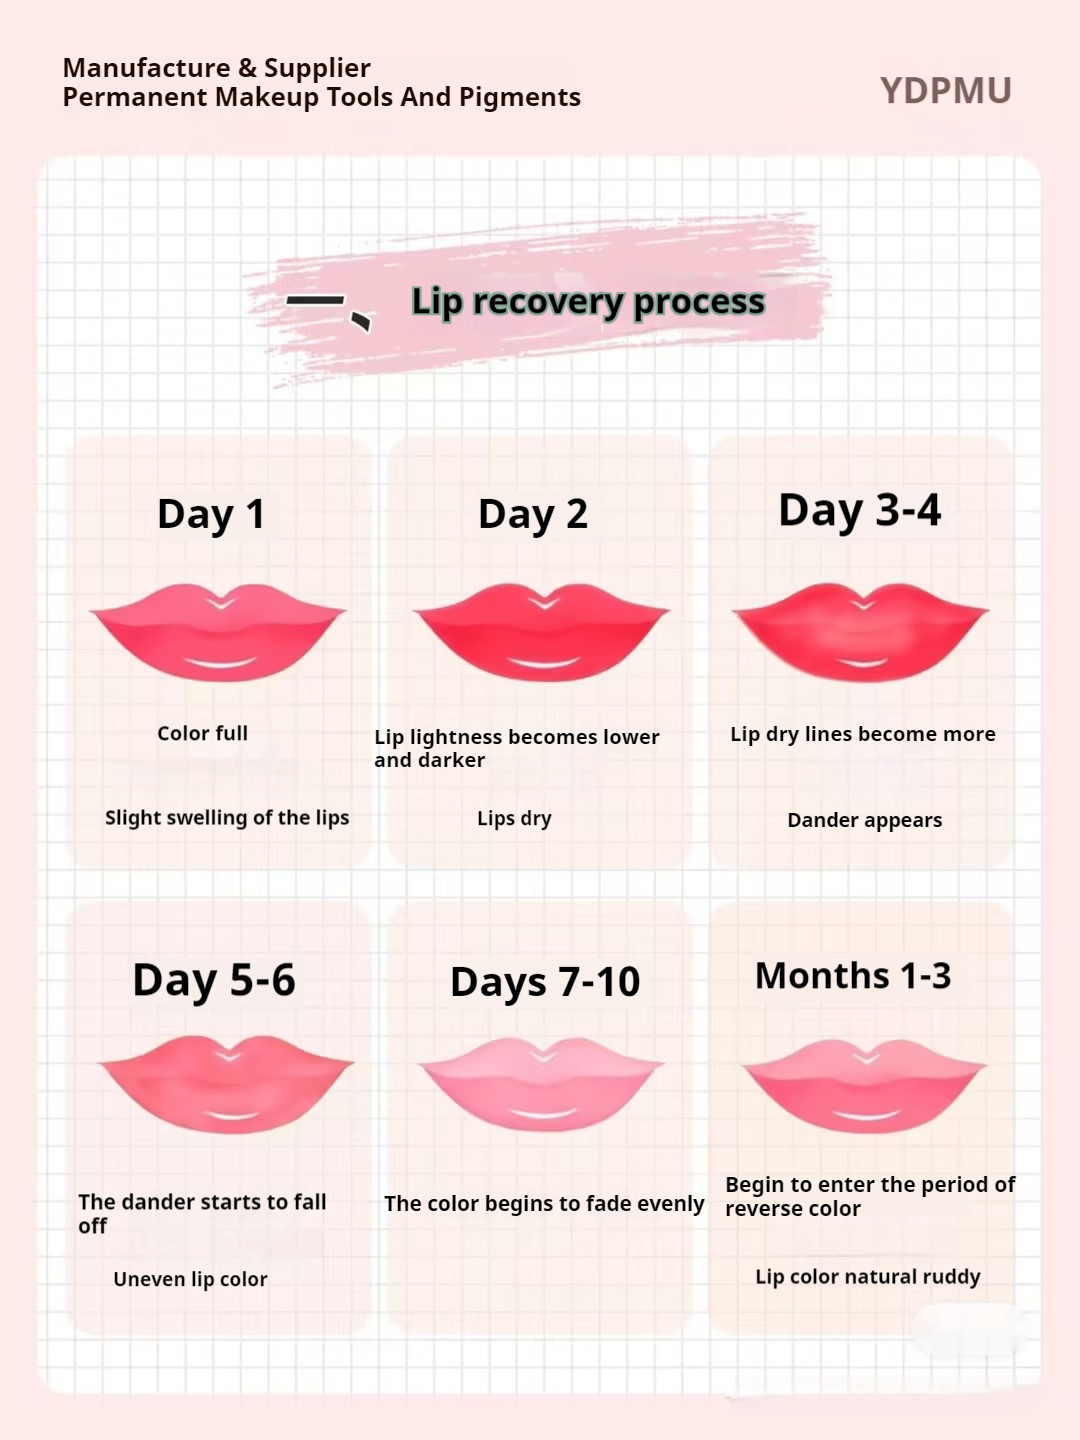 The Lip-tastic Guide: Understanding the Healing Process of Permanent Makeup Lips